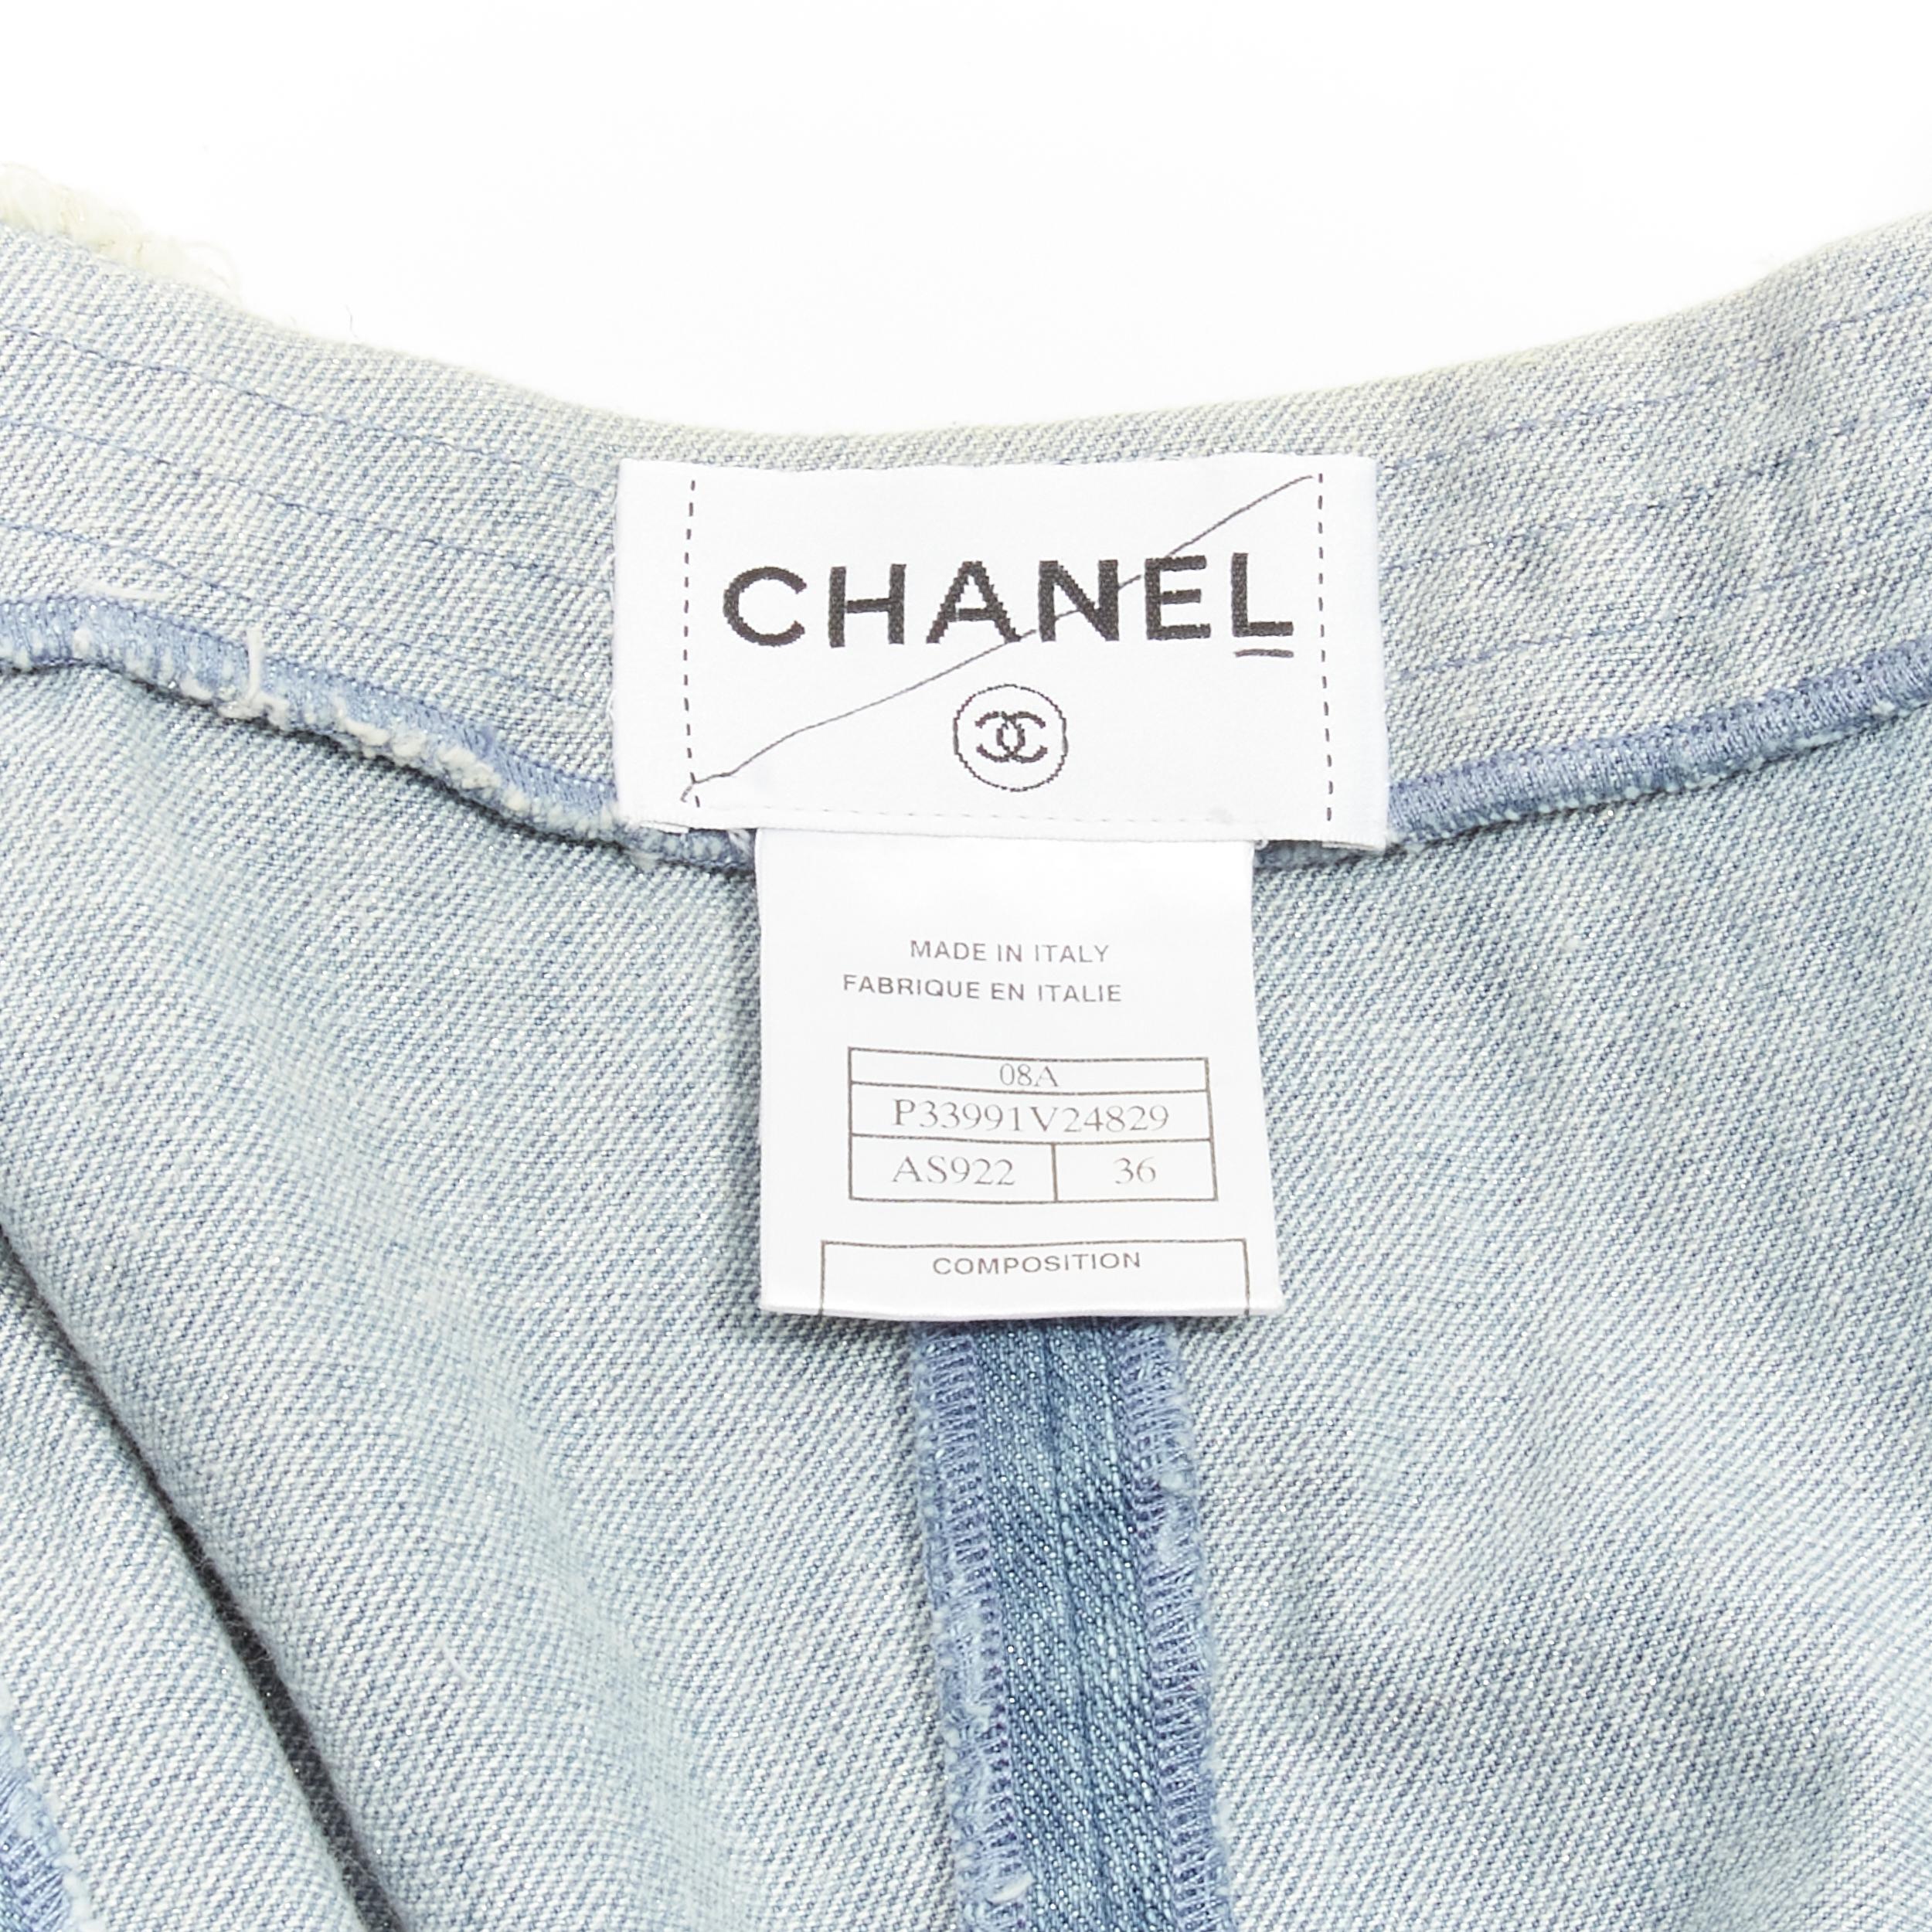 CHANEL 08A Carousel Runway blue distressed denim pocketed zip front dress FR36 S For Sale 6